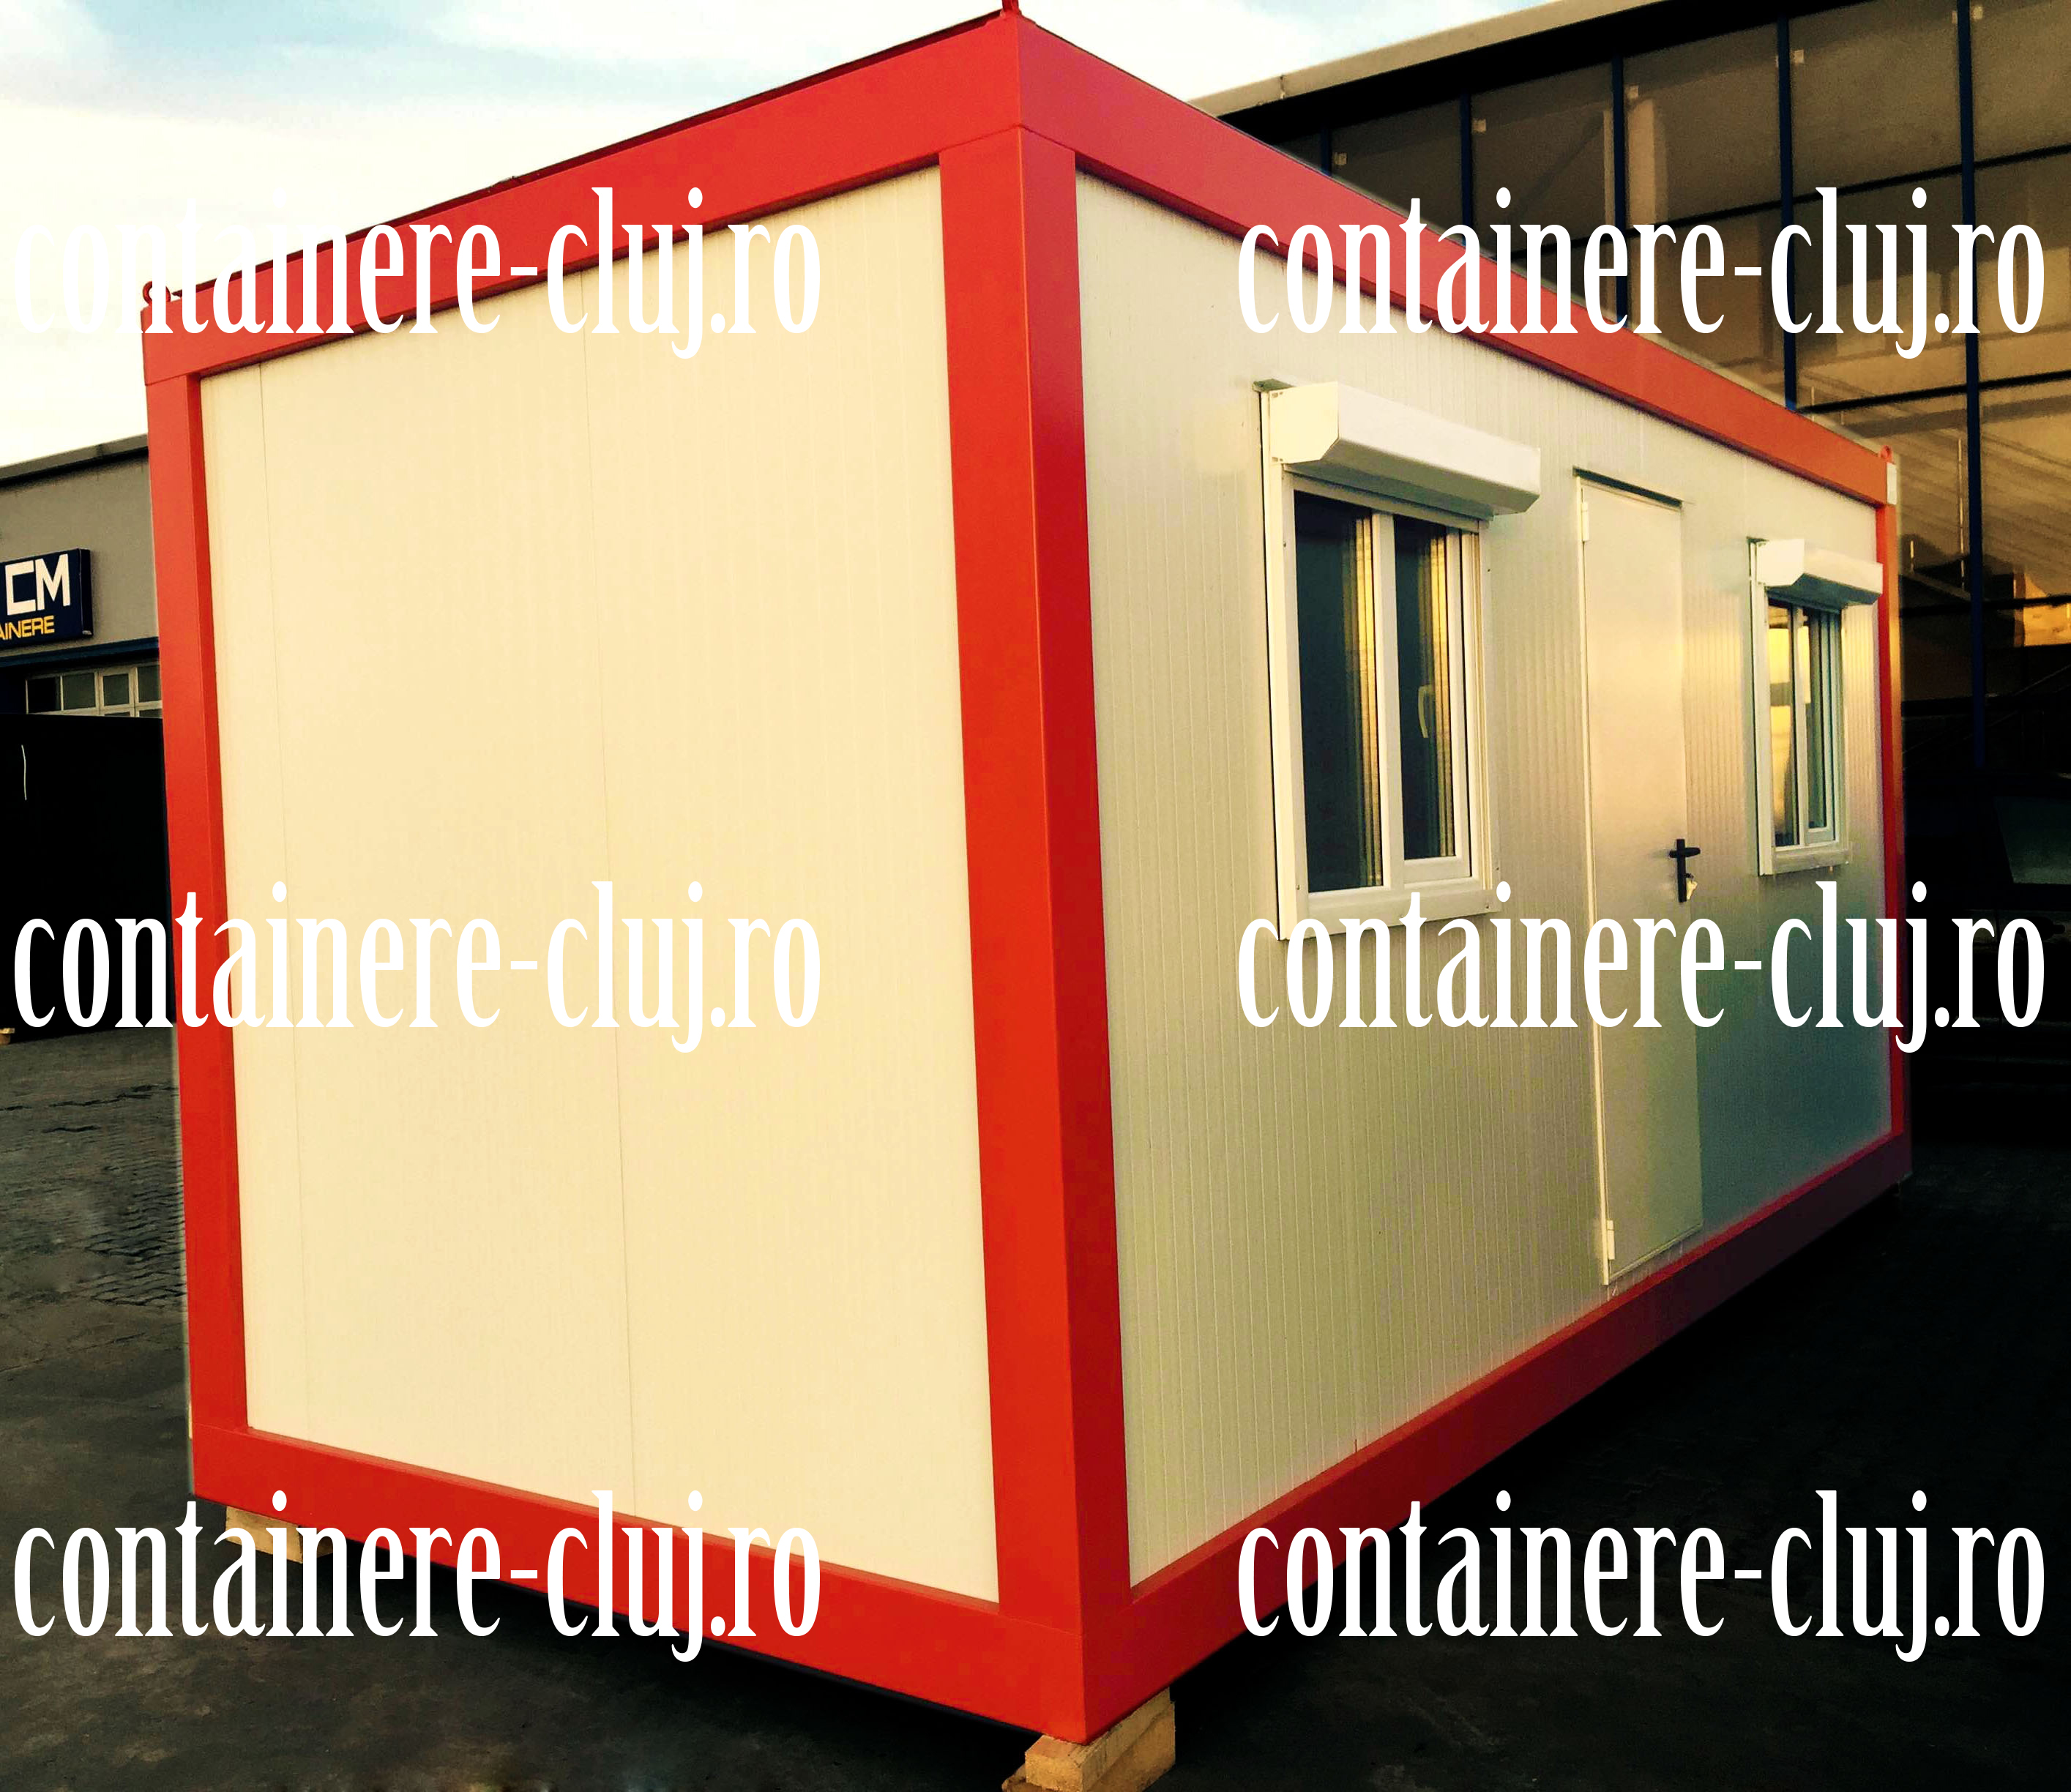 containere Cluj